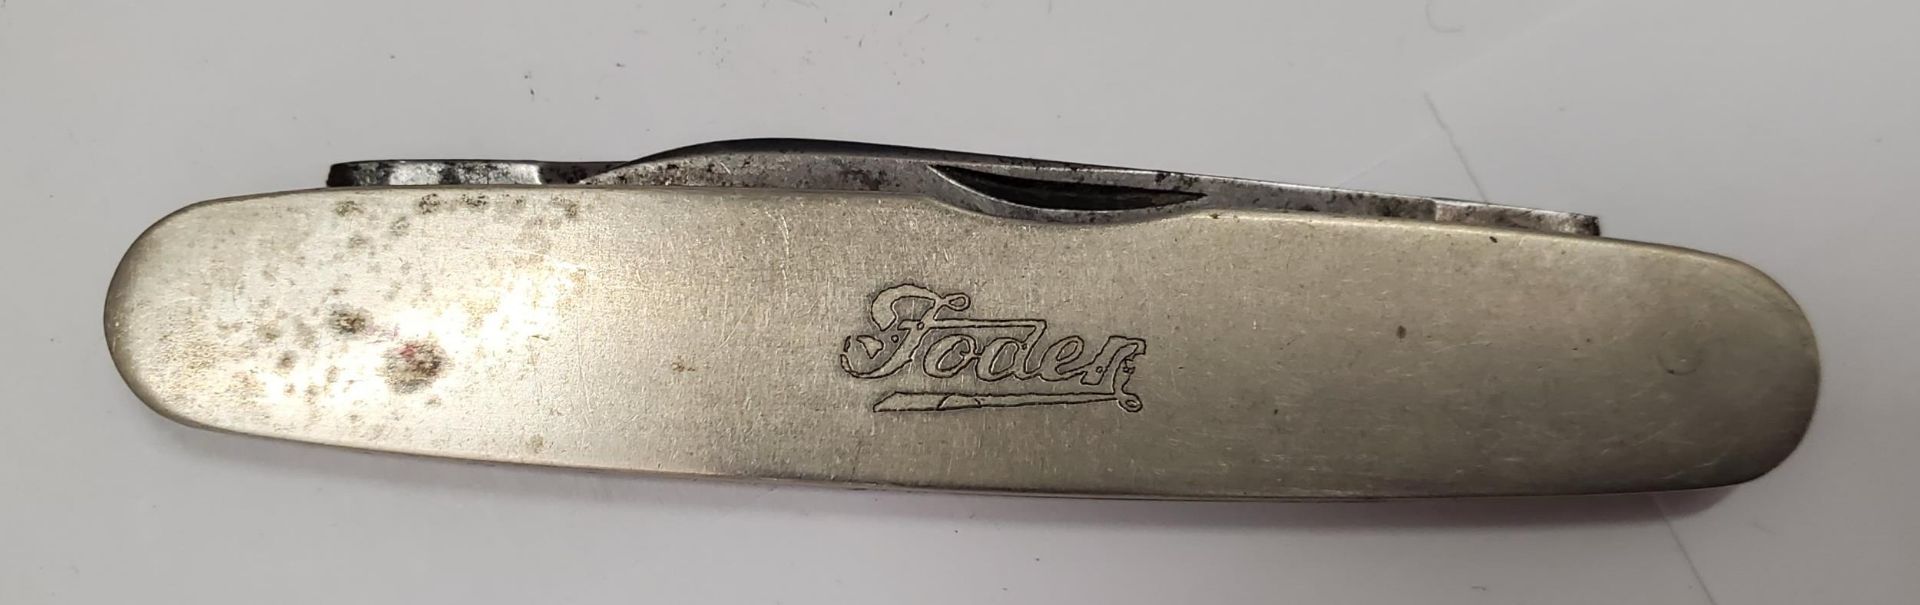 TWO VINTAGE PENKNIVES TO INCLUDE A FODEN AND FINA PLUS A 'RUSHOLME MOTOR CO.' TAPE MEASURE - Image 3 of 4